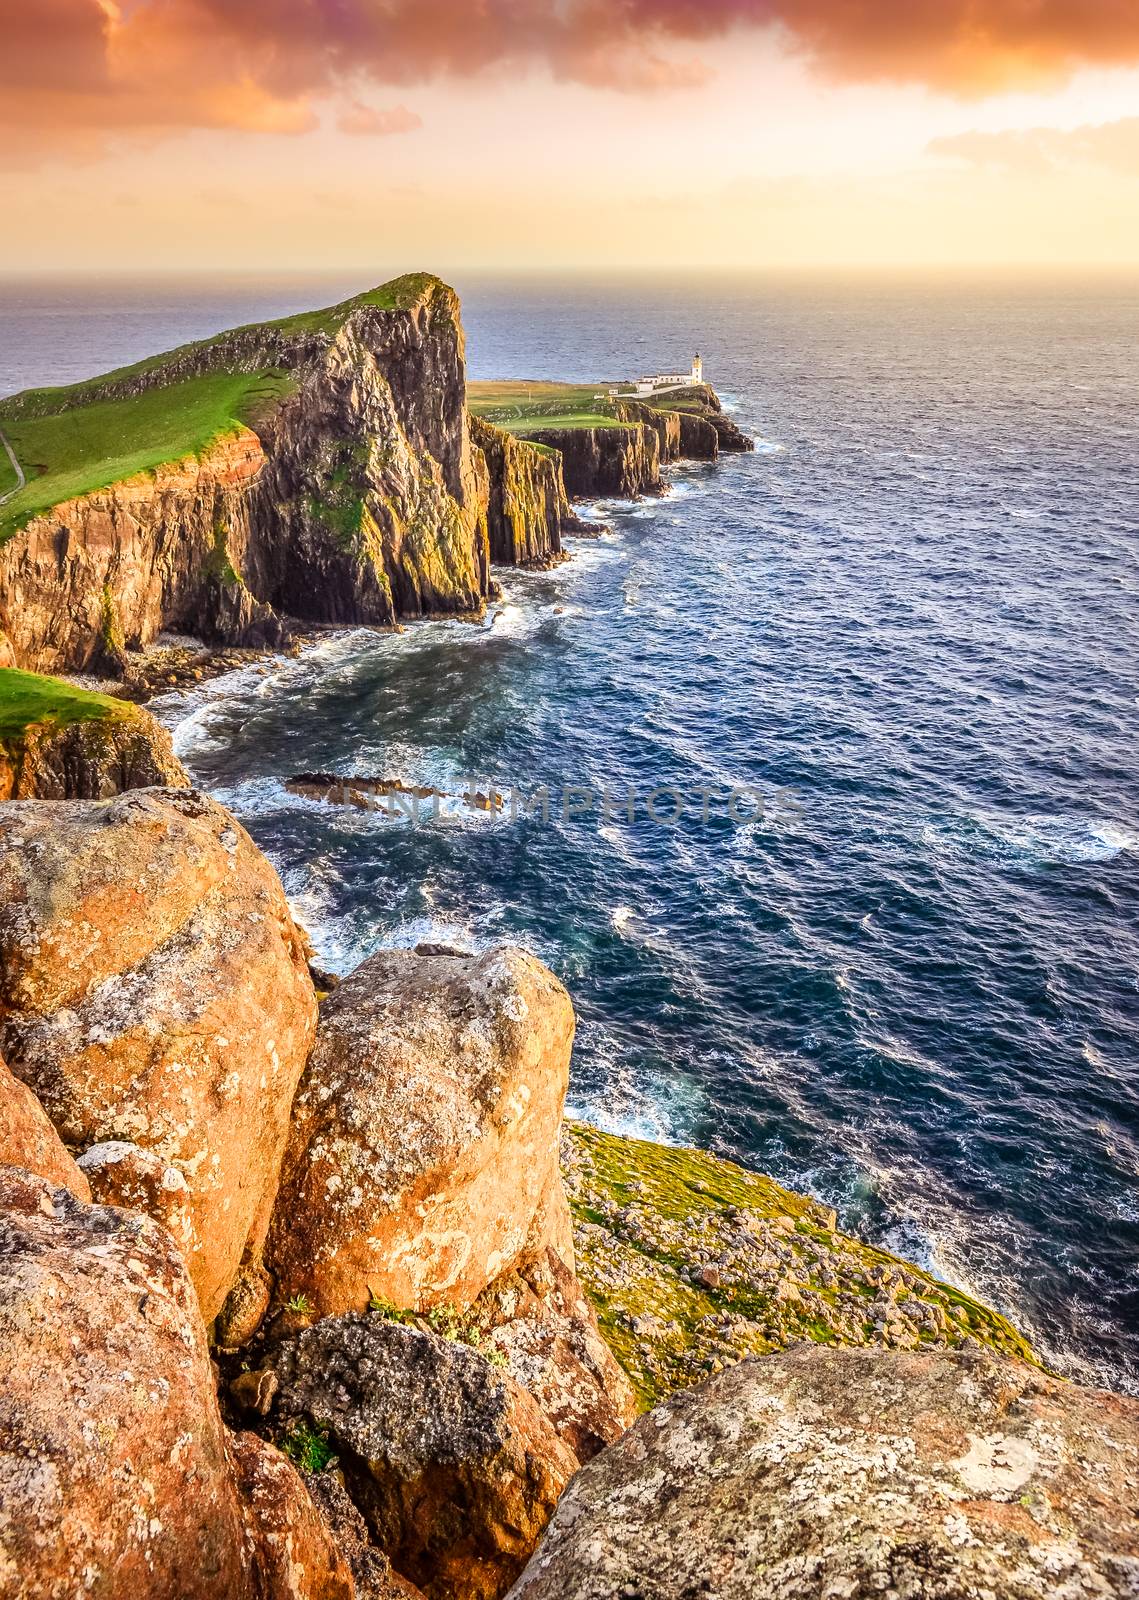 Vertical view of Neist Point lighthouse with rocks in foreground and rocky coastline, Scotland